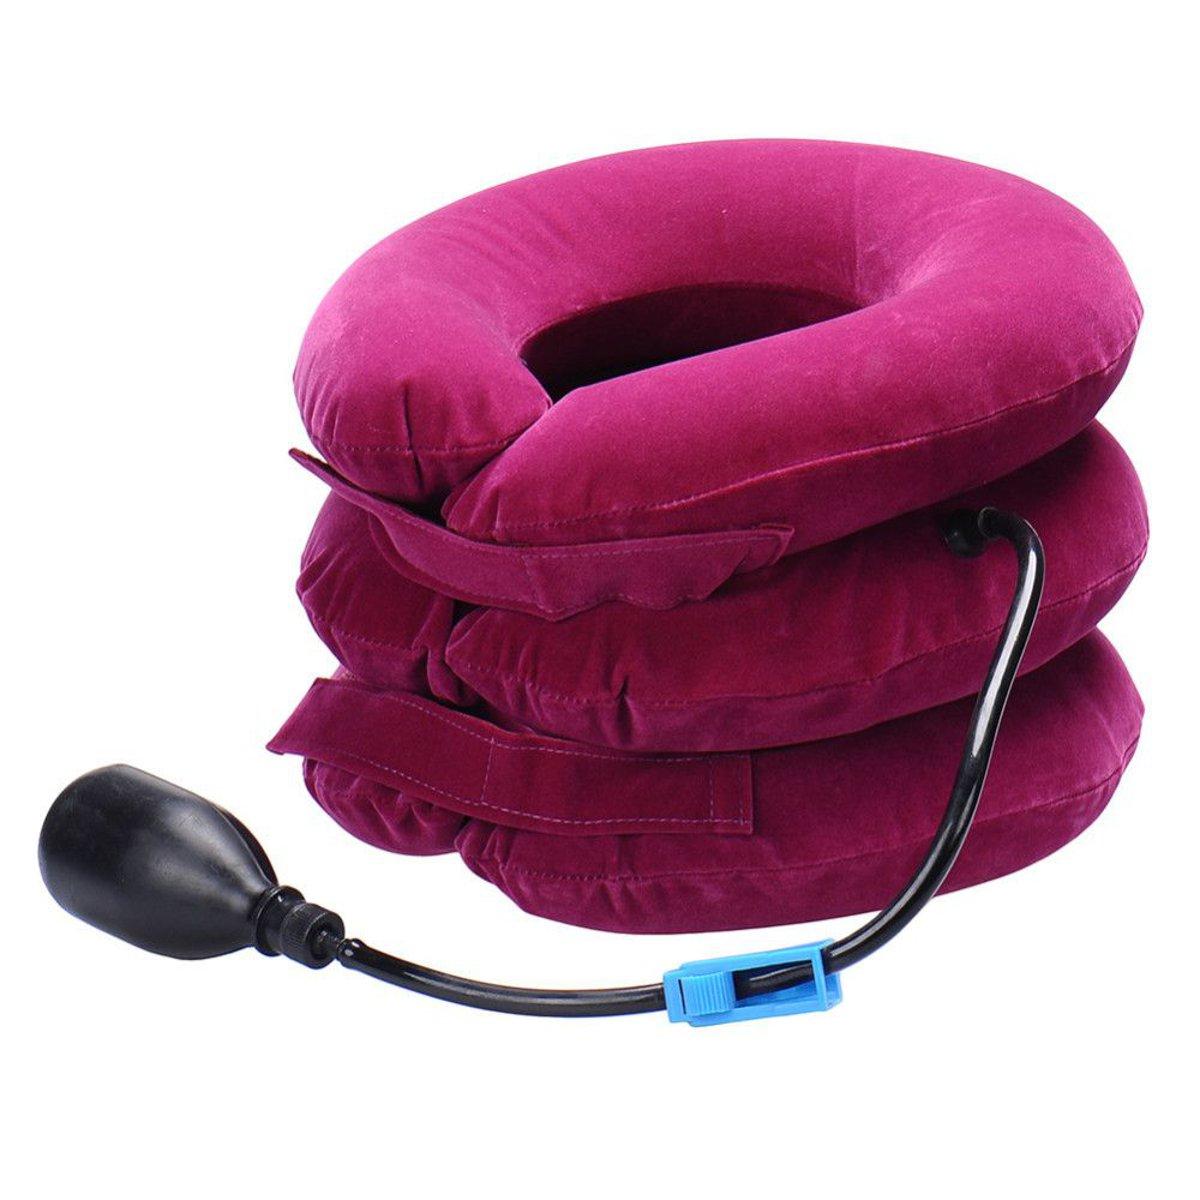 PVC Inflatable Cervical Collar Neck Relief Traction Brace Support Pillow Device RED COLOR